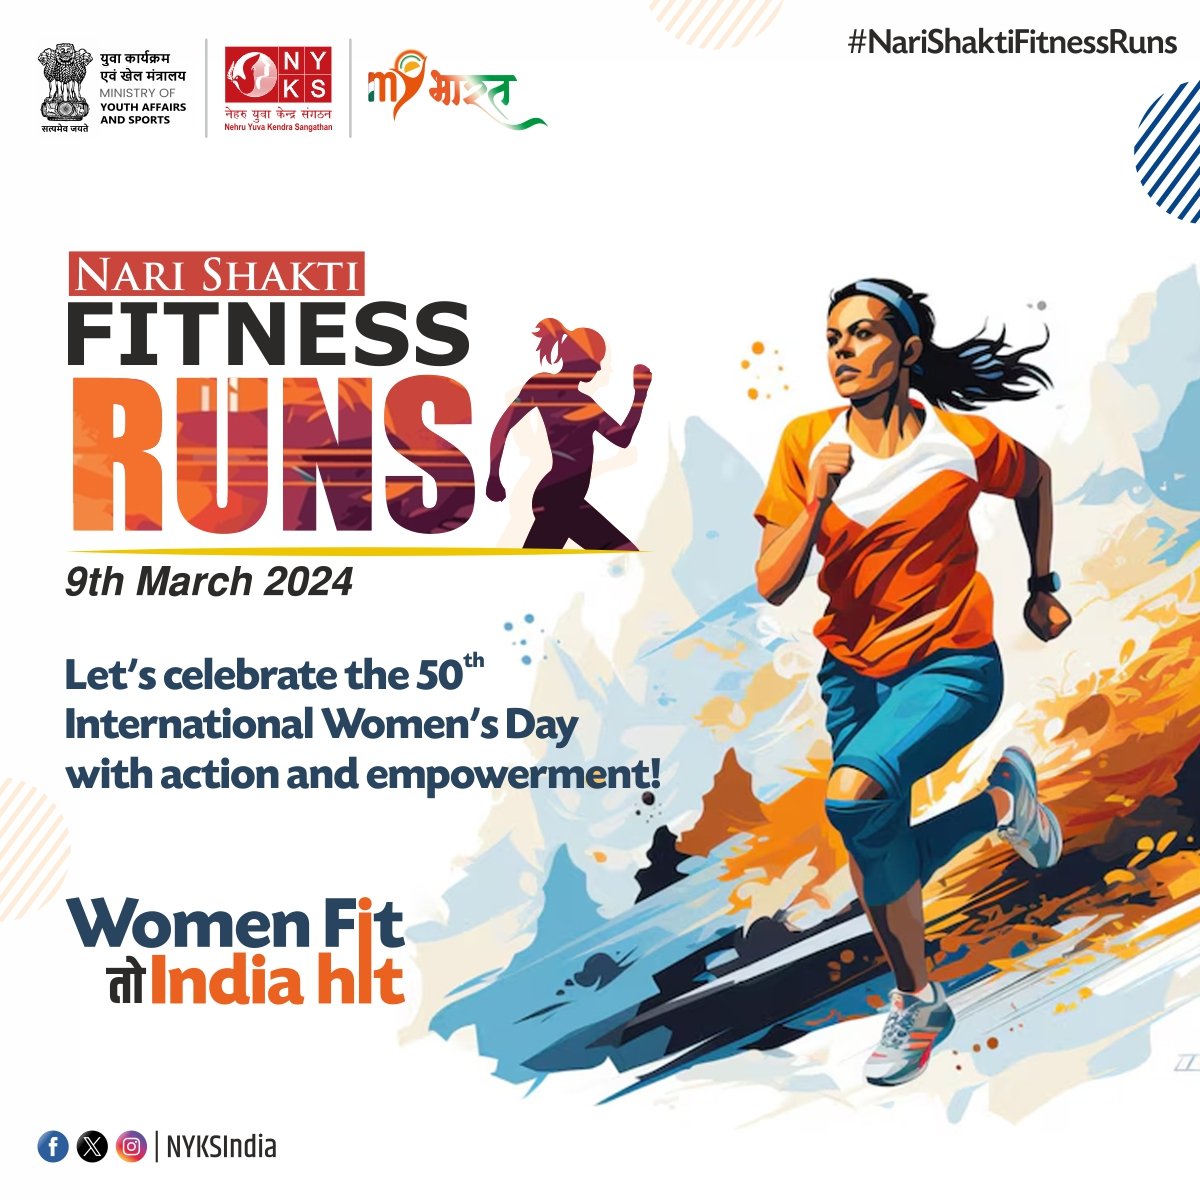 Nari Shakti Fitness Run – a celebration of strength and empowerment on the 50th International Women's Day! 🏃‍♀️💪 Let's make this day unforgettable with every stride! 🌟 #NariShaktiFitnessRuns #IWD2024 #EmpowerHer #WomenFitToIndiaHit #NYKS